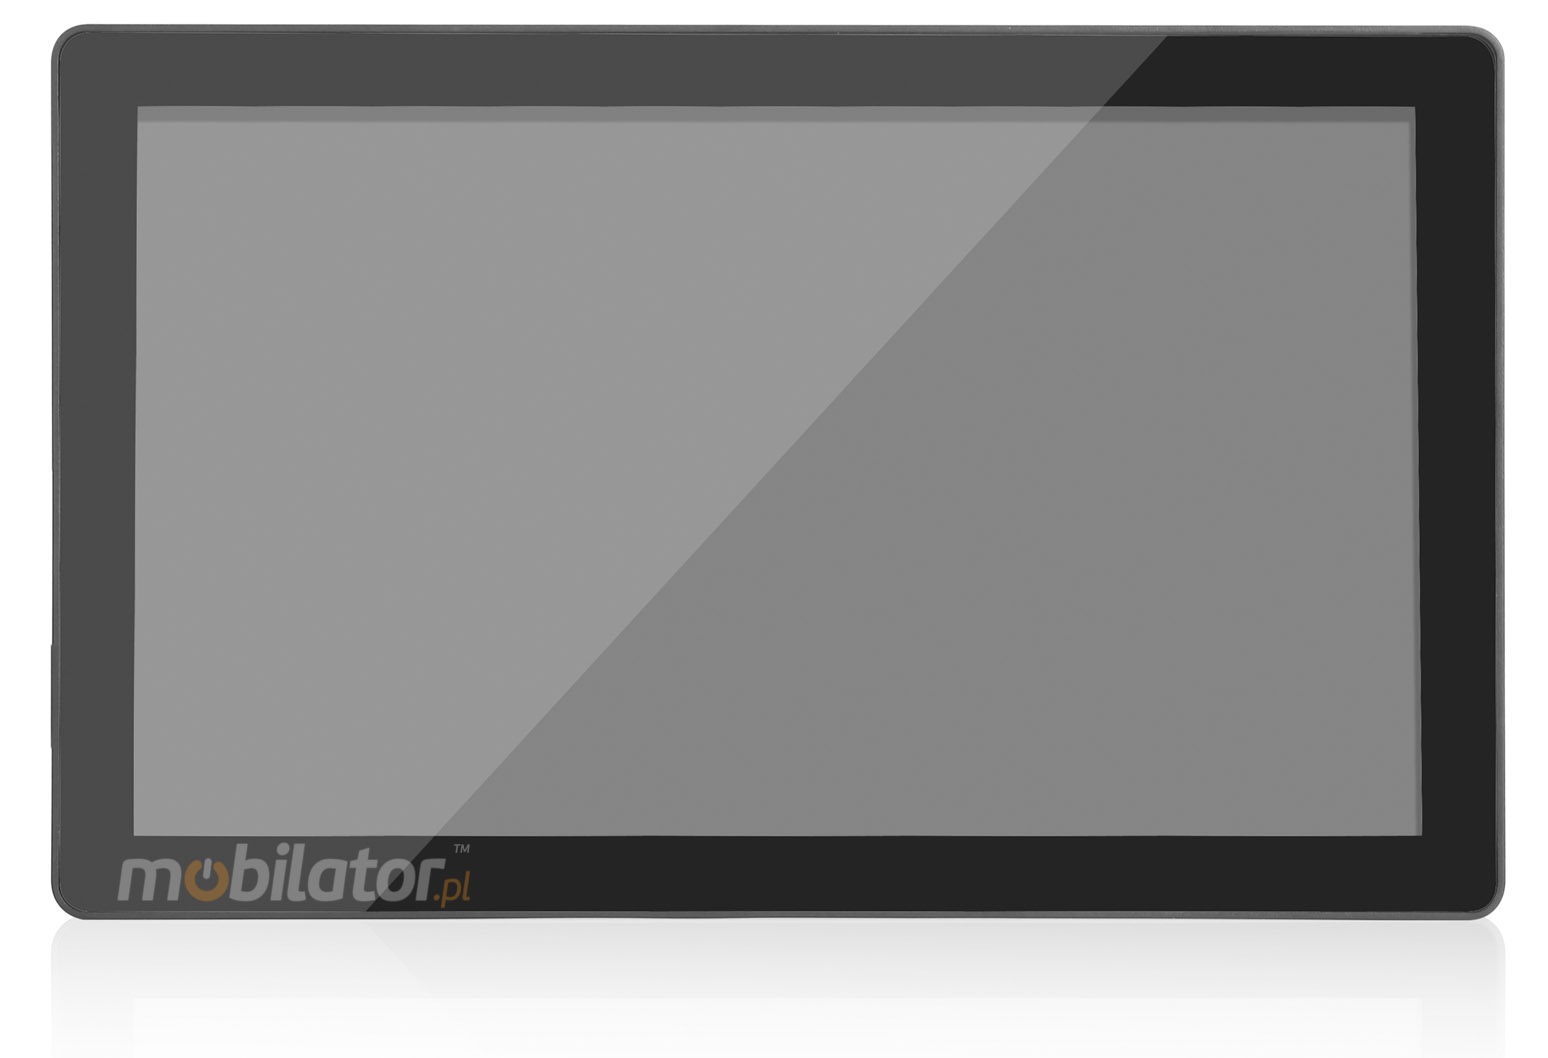 Mobilator CTPC156RD3 CCETouch Flat Design PCAP Fanless Touch PC, LED panel, 10 points touch screen, built-in WIFI, 12V DC input